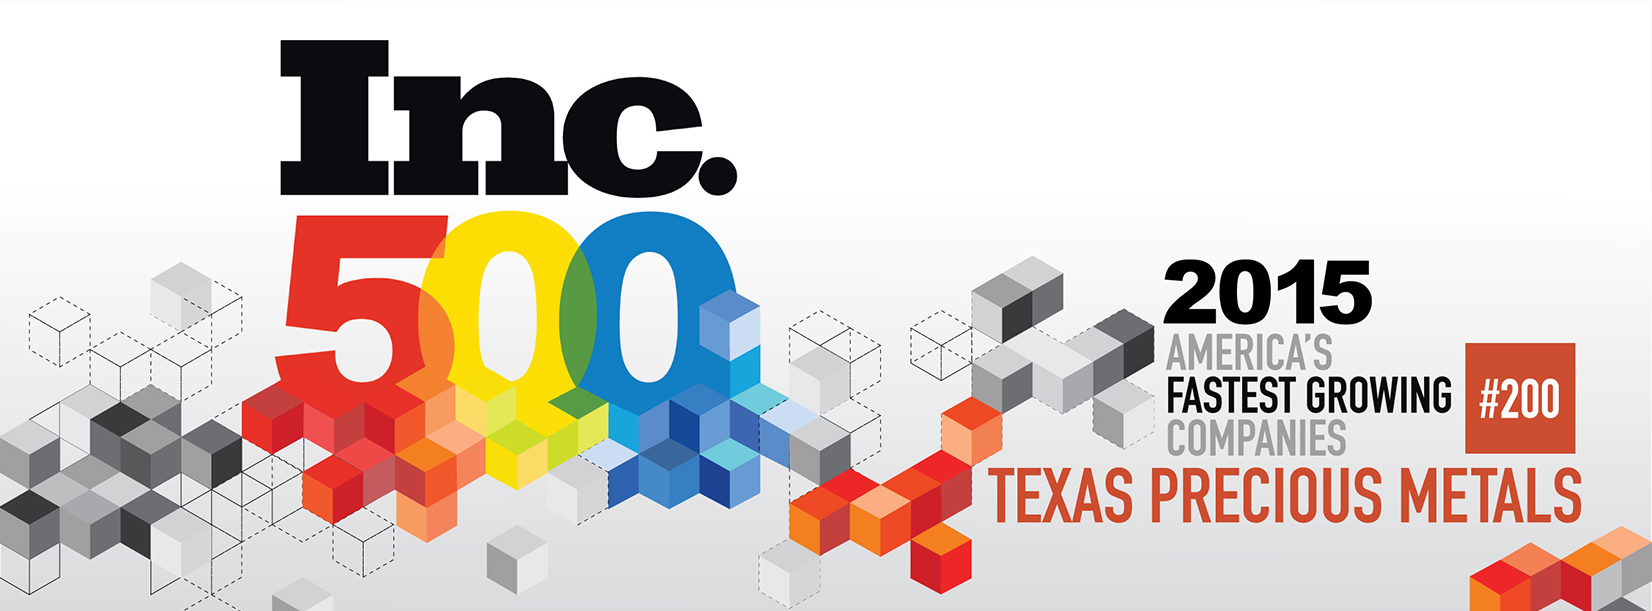 Texas Precious Metals honored by Inc 500 as the #200 Fastest Growing Private company in America for 2015